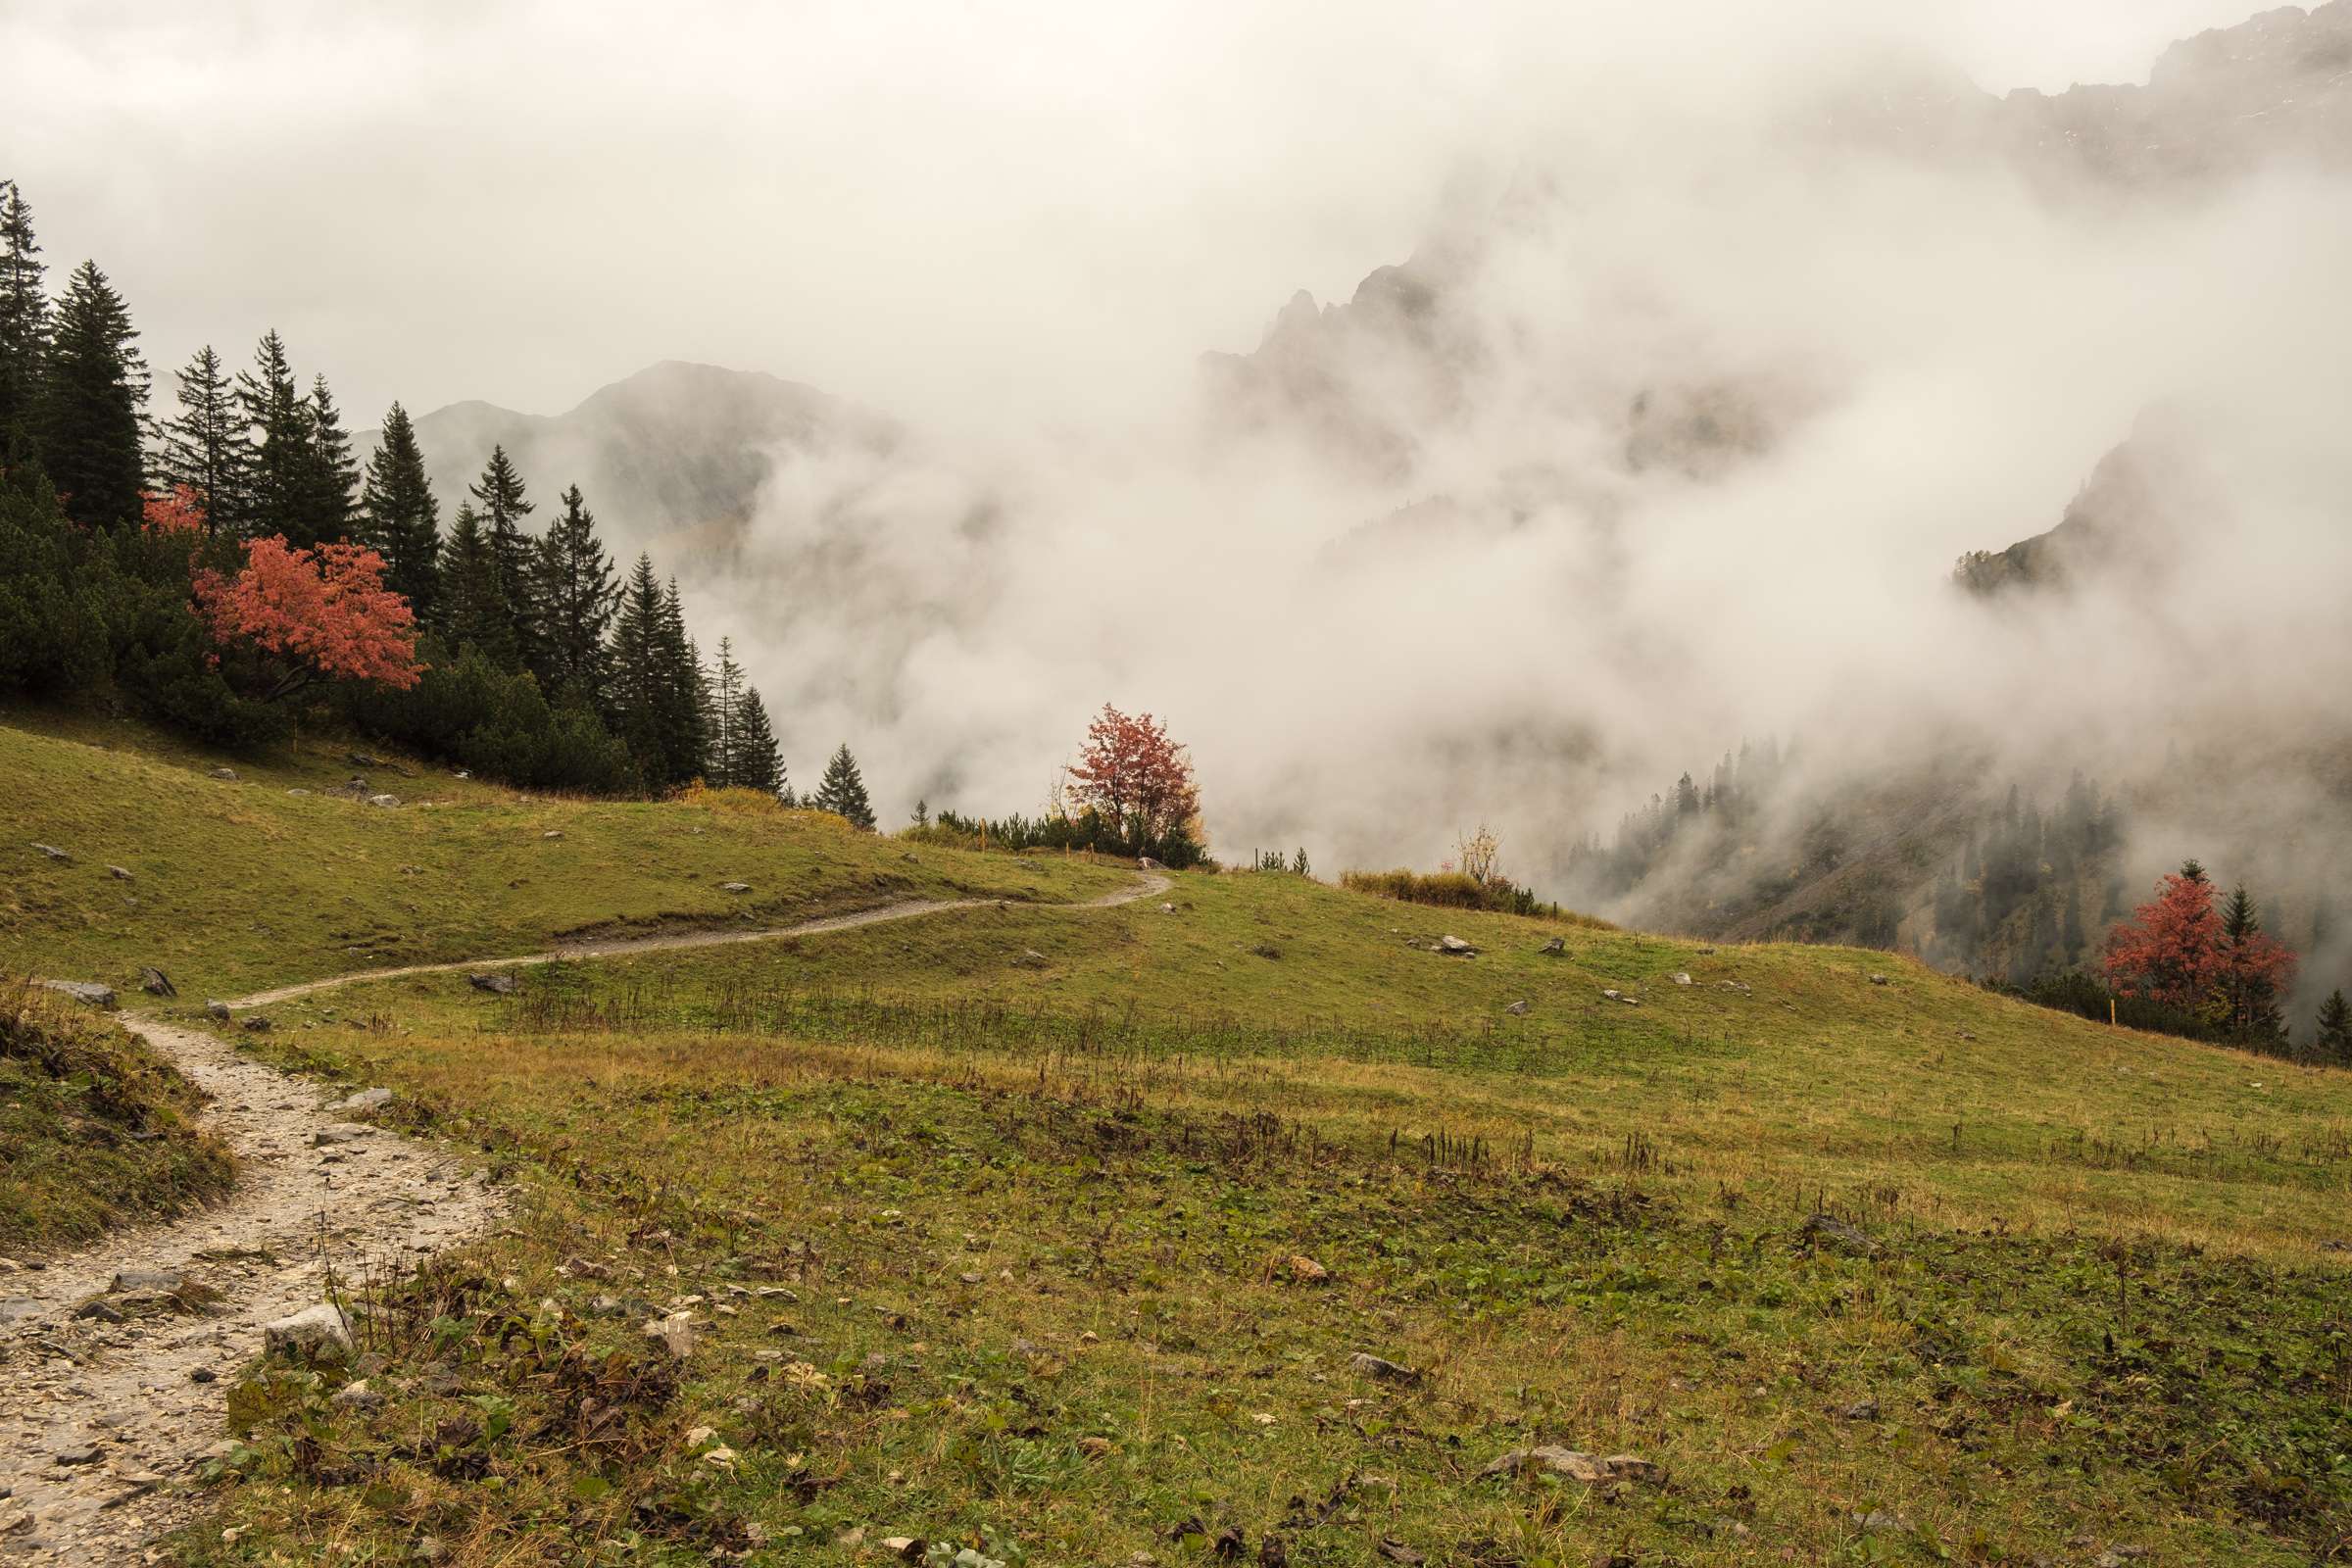 A path snaking through an alpine pasture in the Karwendel mountains towards the clouds